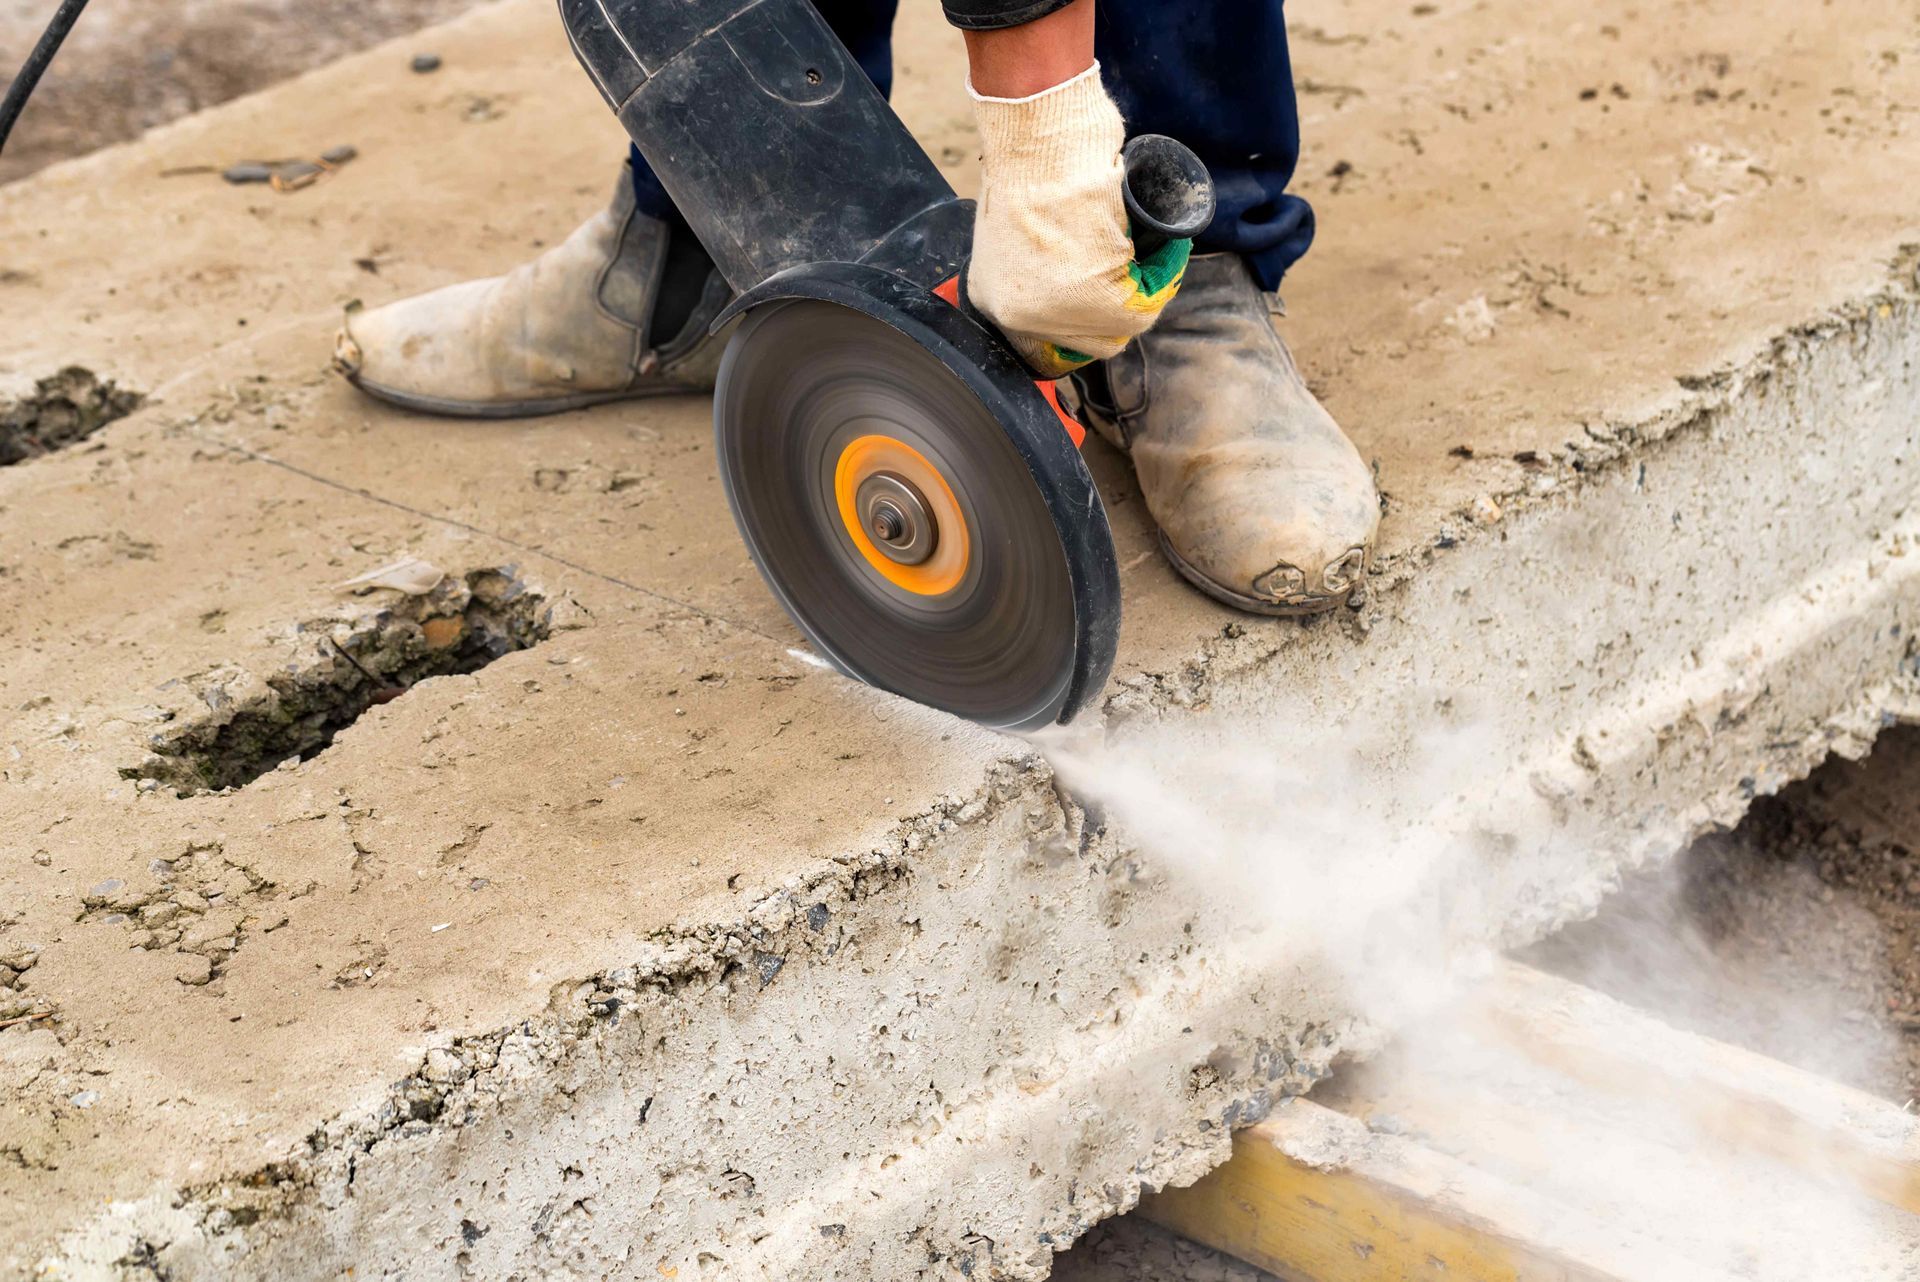 Technician Cuts Piece Of Concrete With Circular Saw